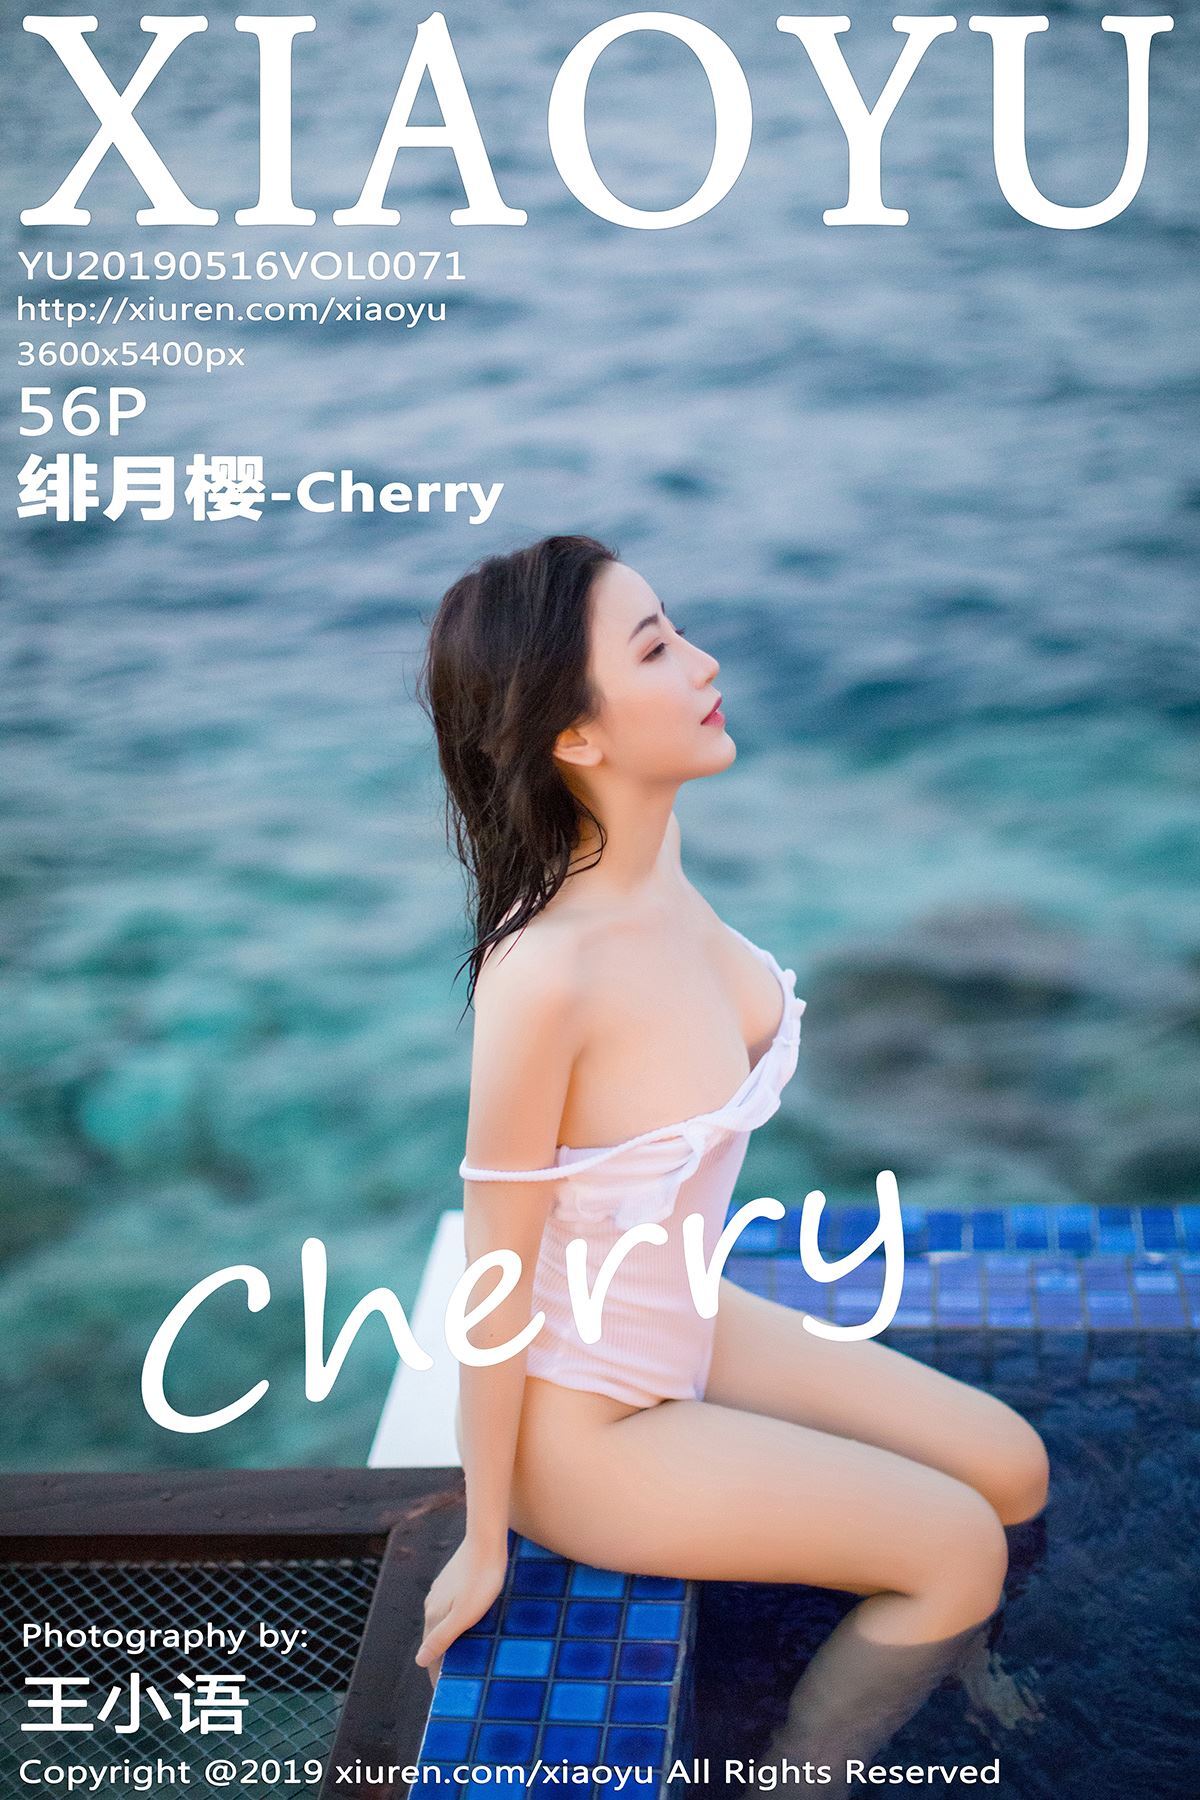 [Xiaoyu language and painting] May 16, 2019 vol.071 feiyueying cherry y